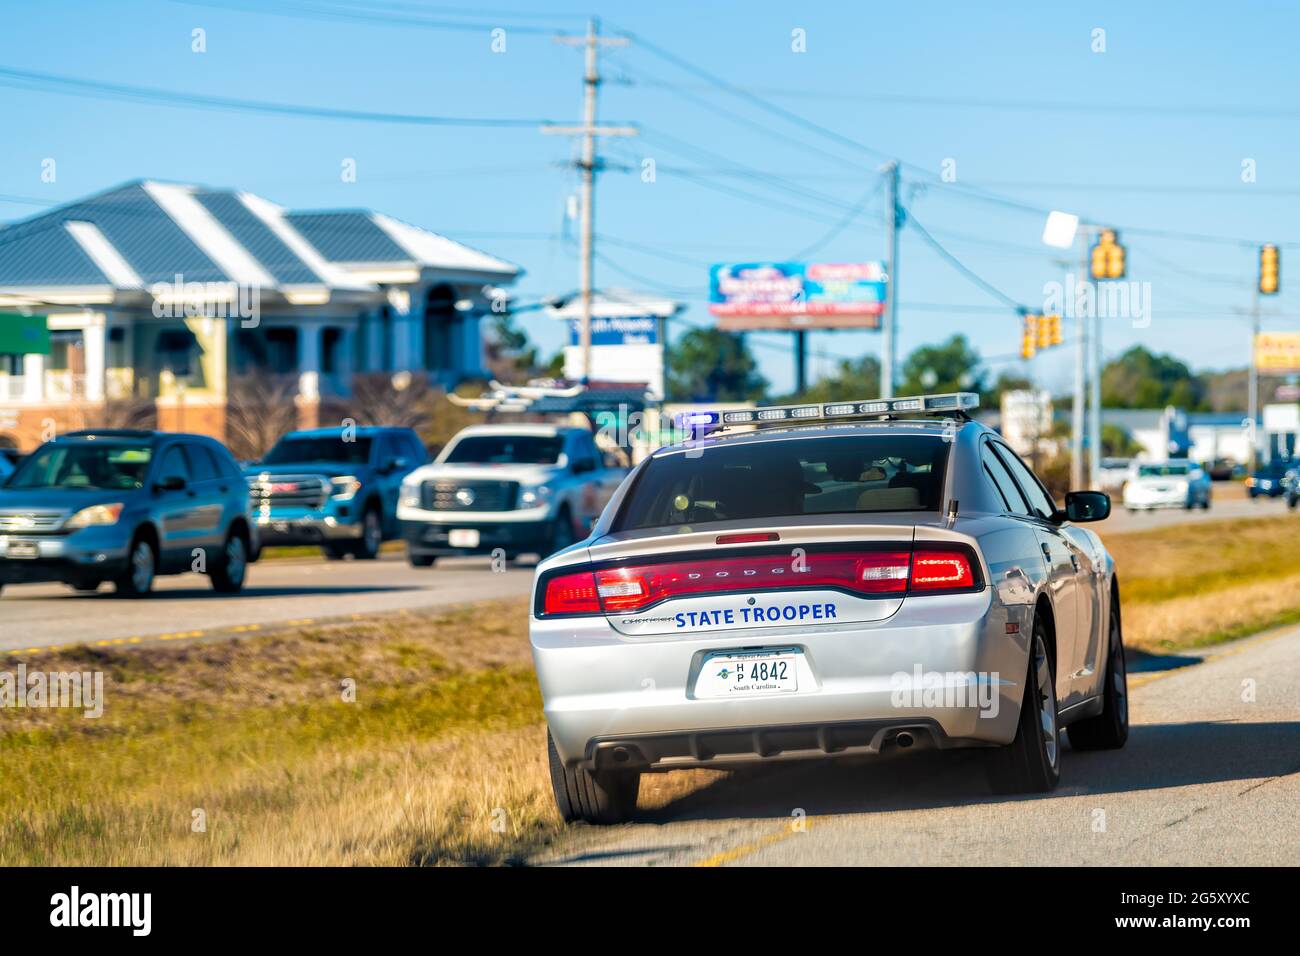 Georgetown, USA - February 3, 2021: Historic city George town in South Carolina with state trooper car on road flashing lights in traffic Stock Photo